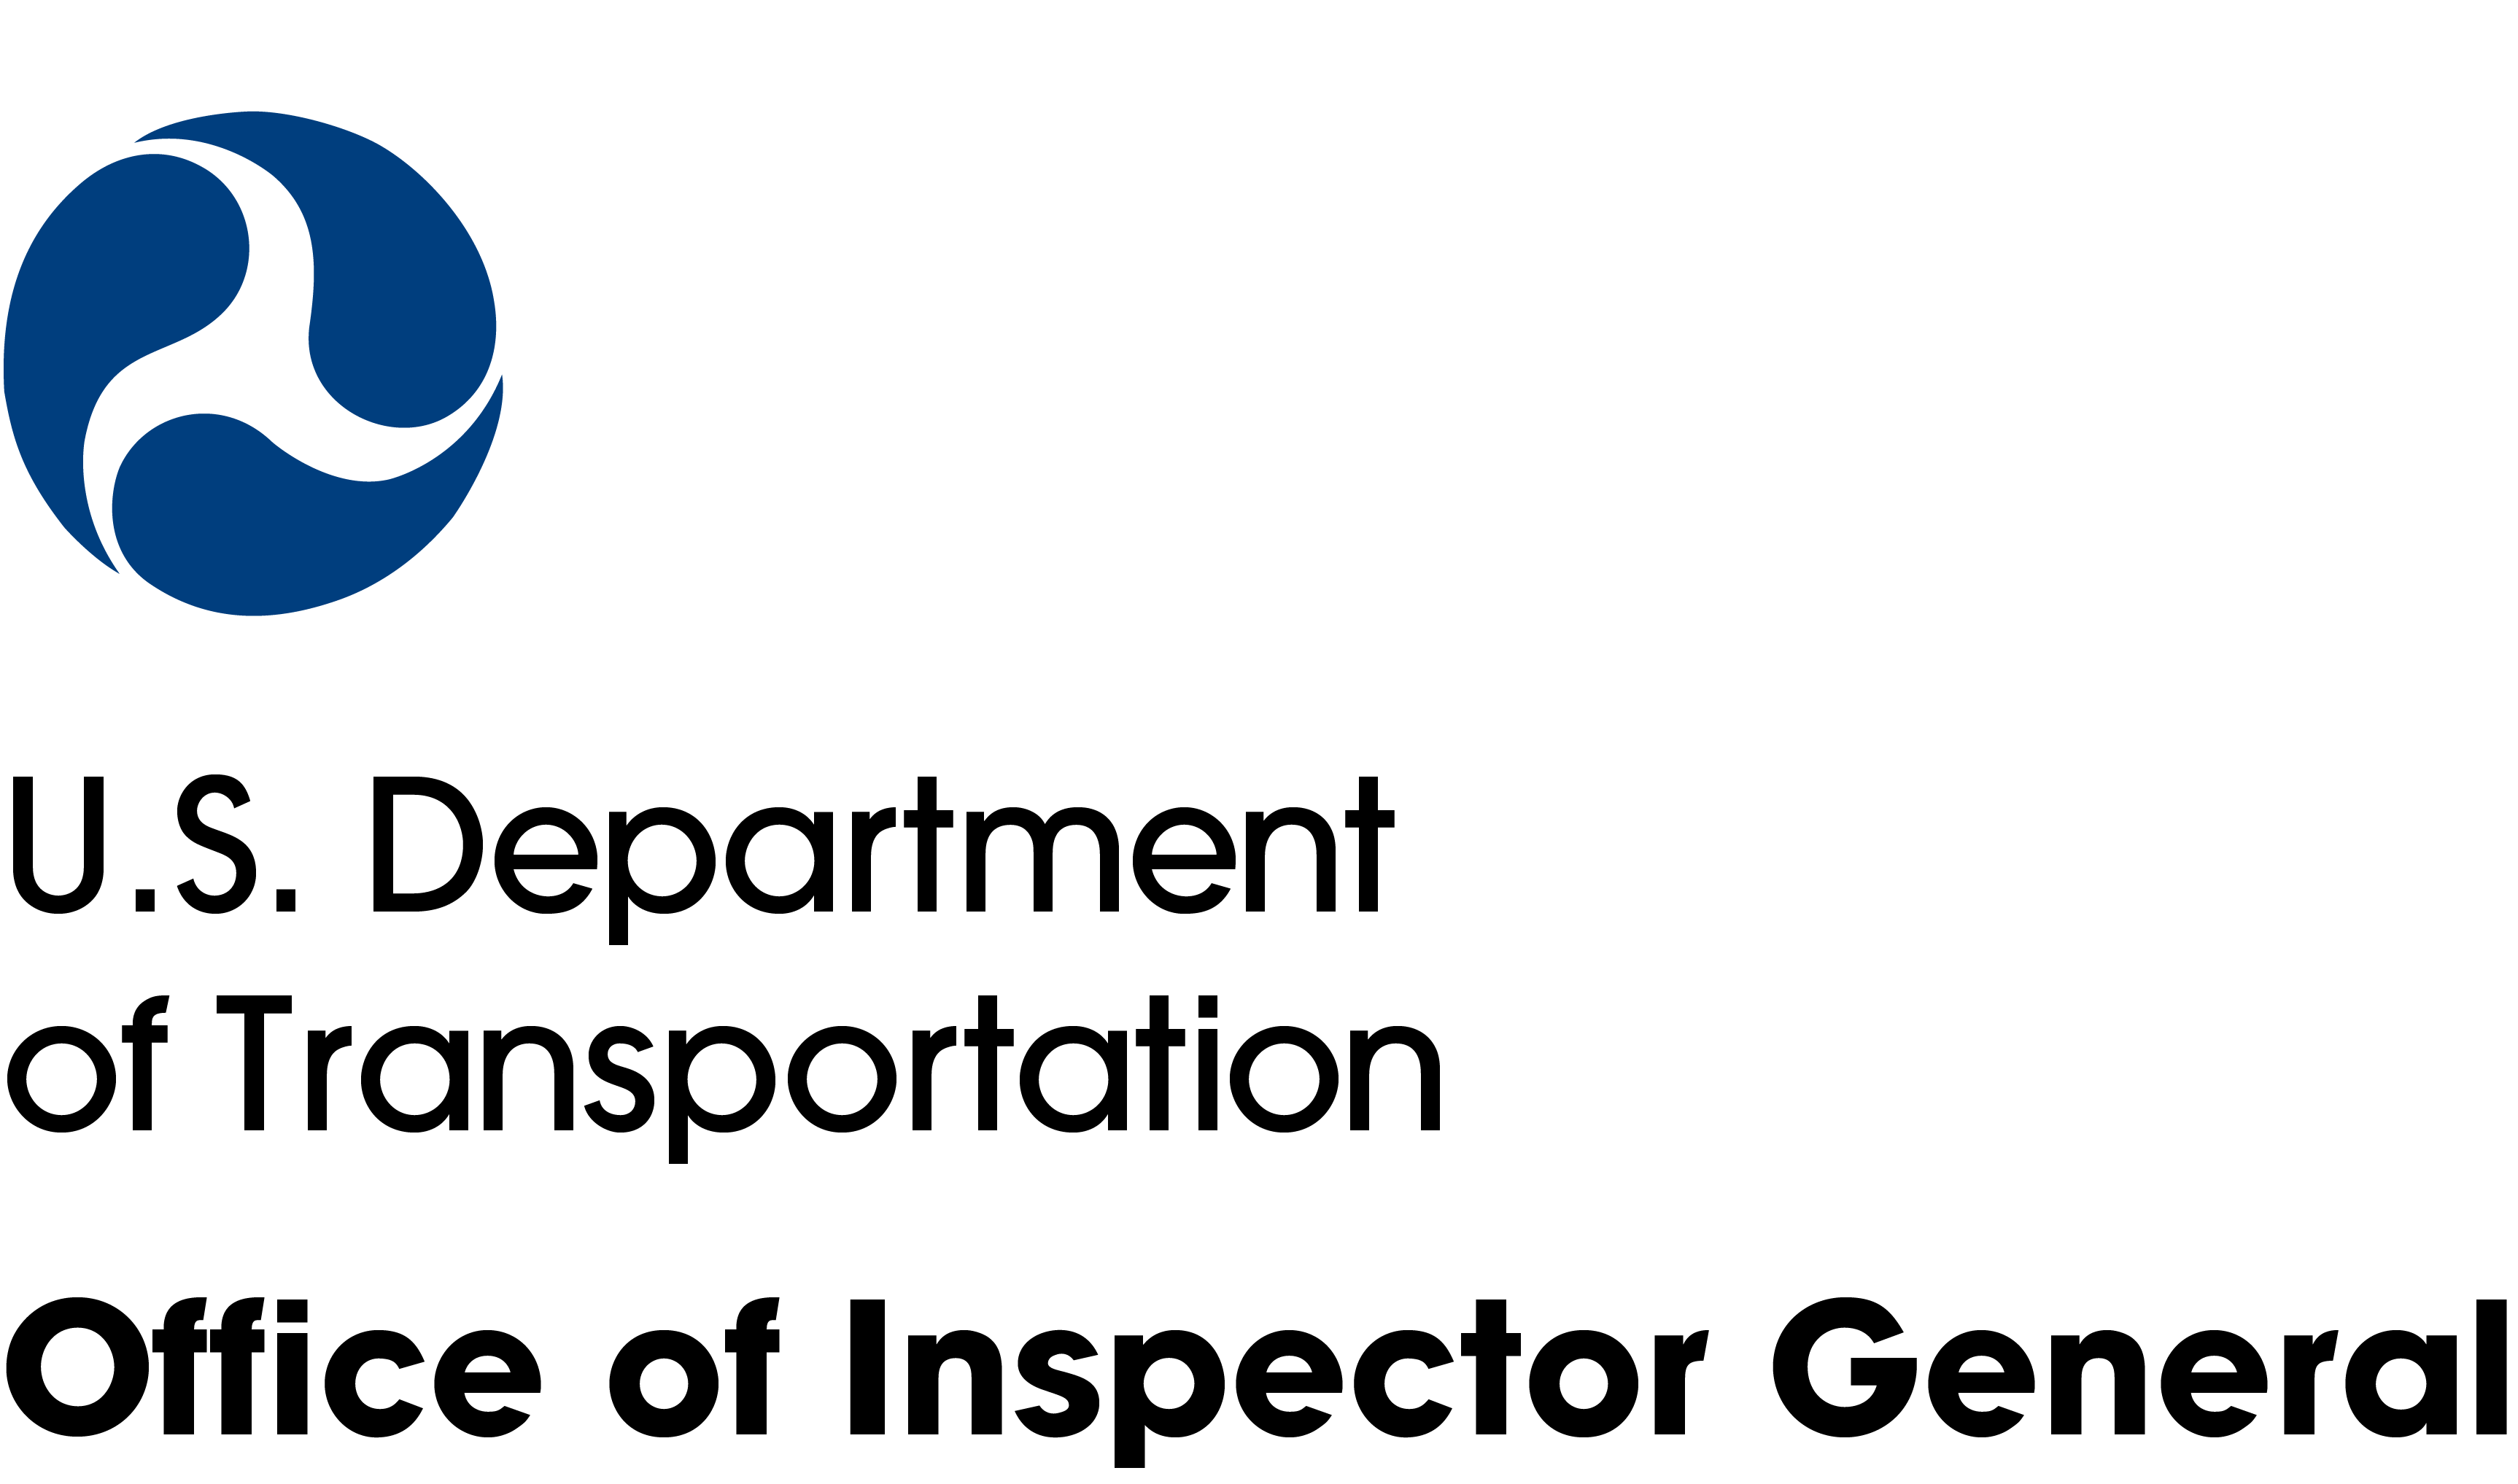 USDOT Logo - File:Office of Inspector General logo for the USDOT.png - Wikimedia ...